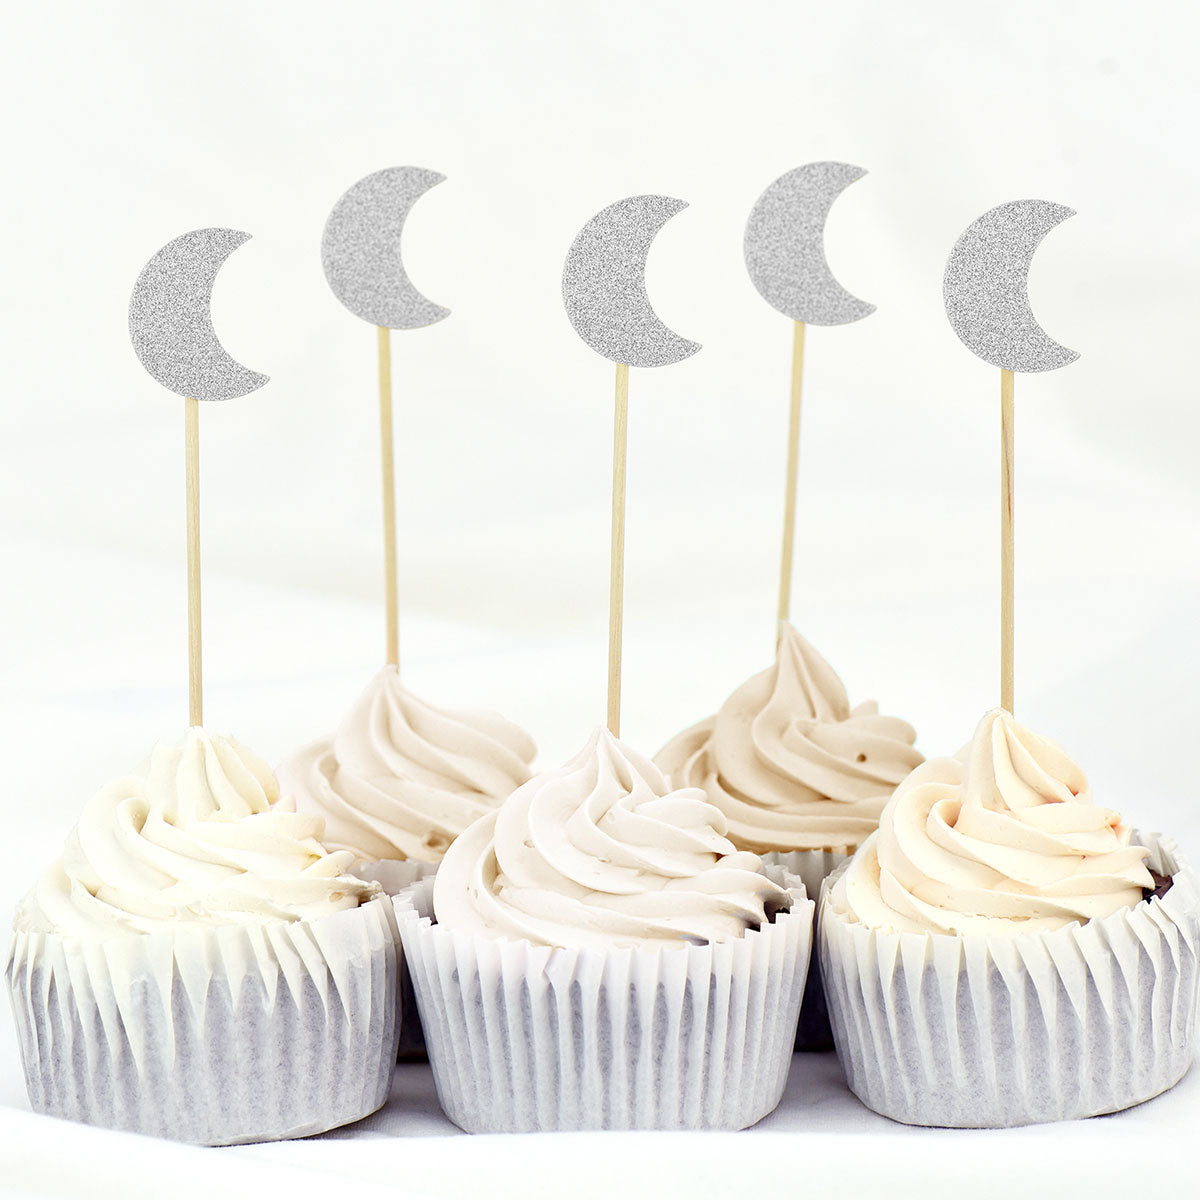 Silver Glitter Moon Cake Toppers 50 Pcs